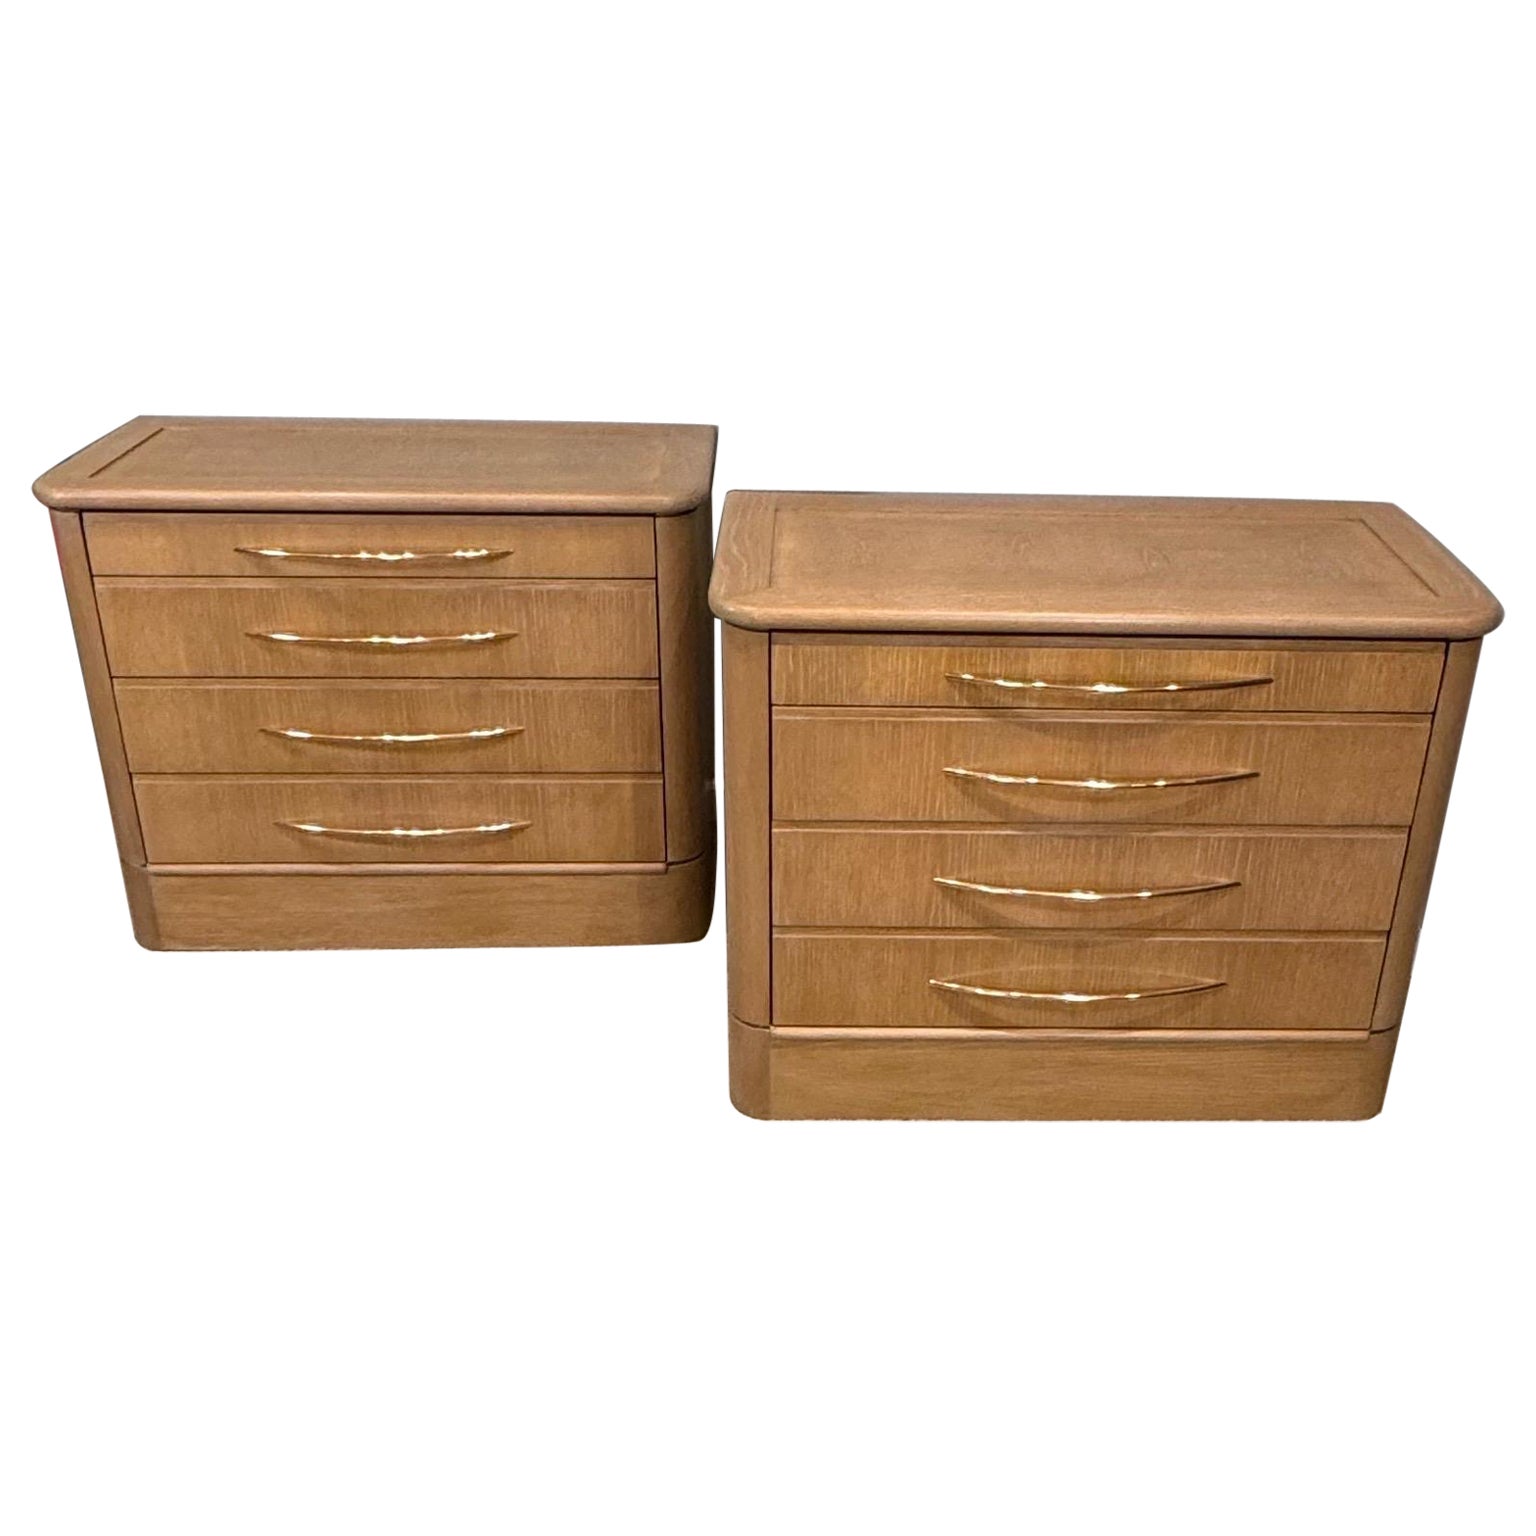 A Pair of Bedside Chests  For Sale